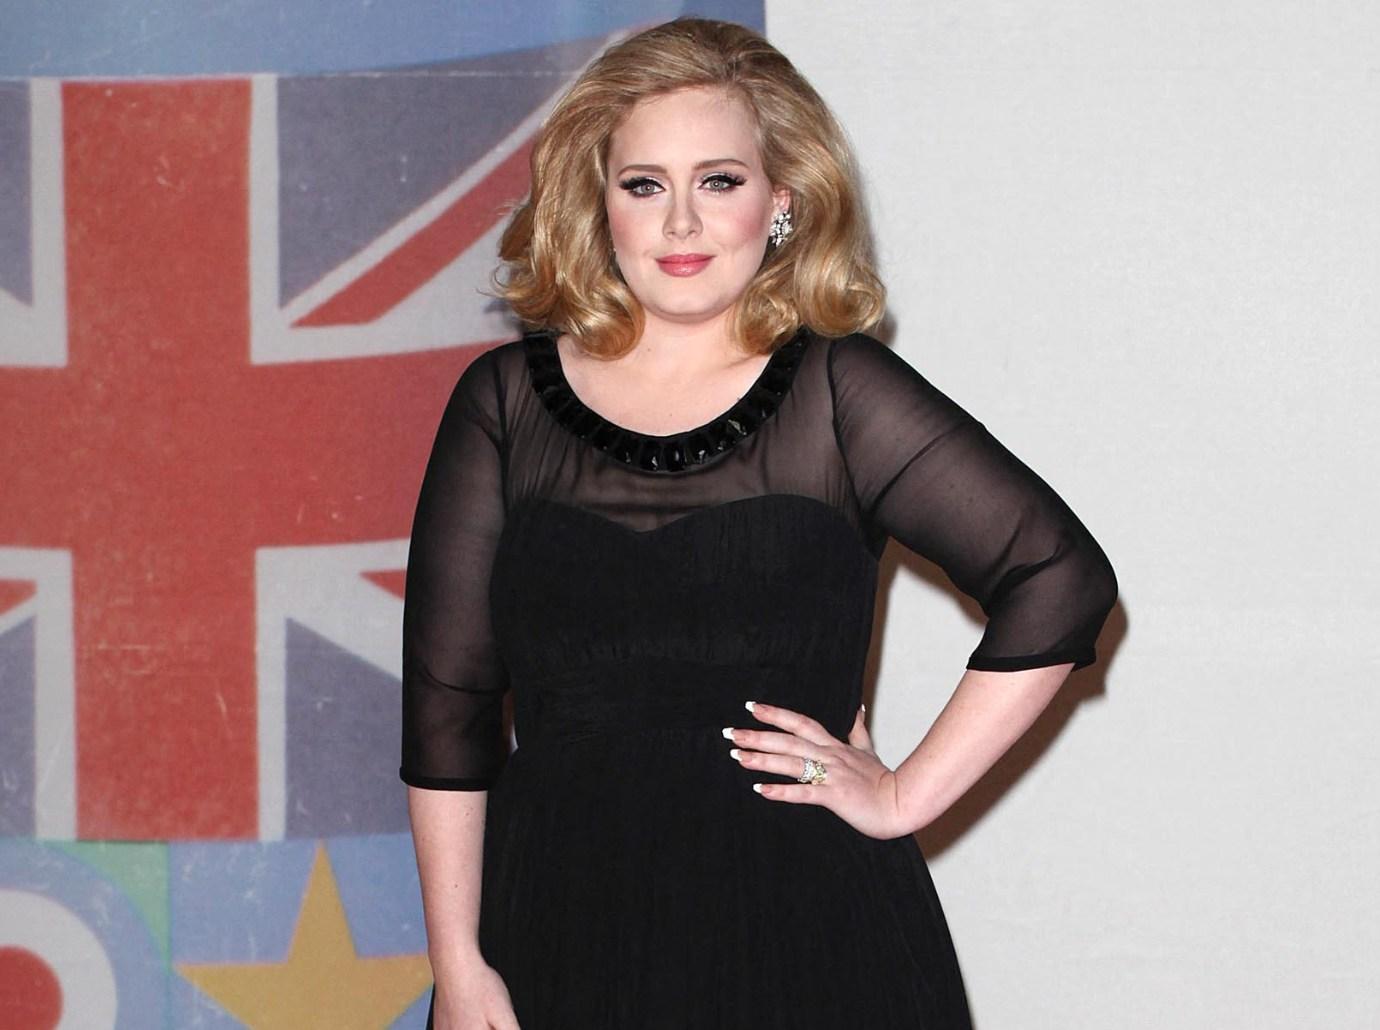 Adele Is Working Out 2-3 Times A Day: 'Can Move Mountains With My Bum'